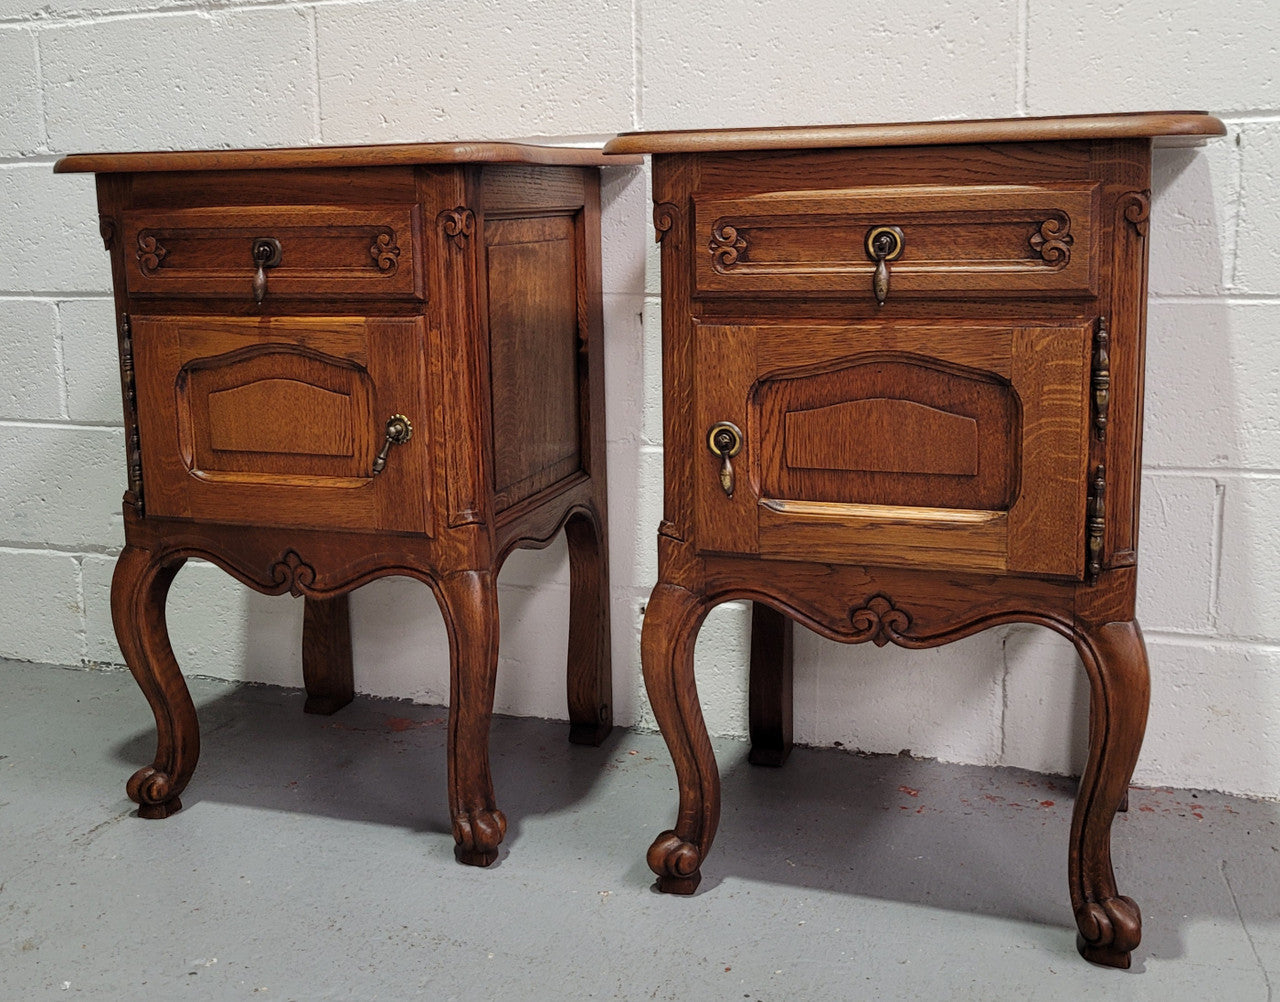 Pair of low Louis XV Style Oak bedsides with hard to find wooden tops. They are in good original detailed condition.